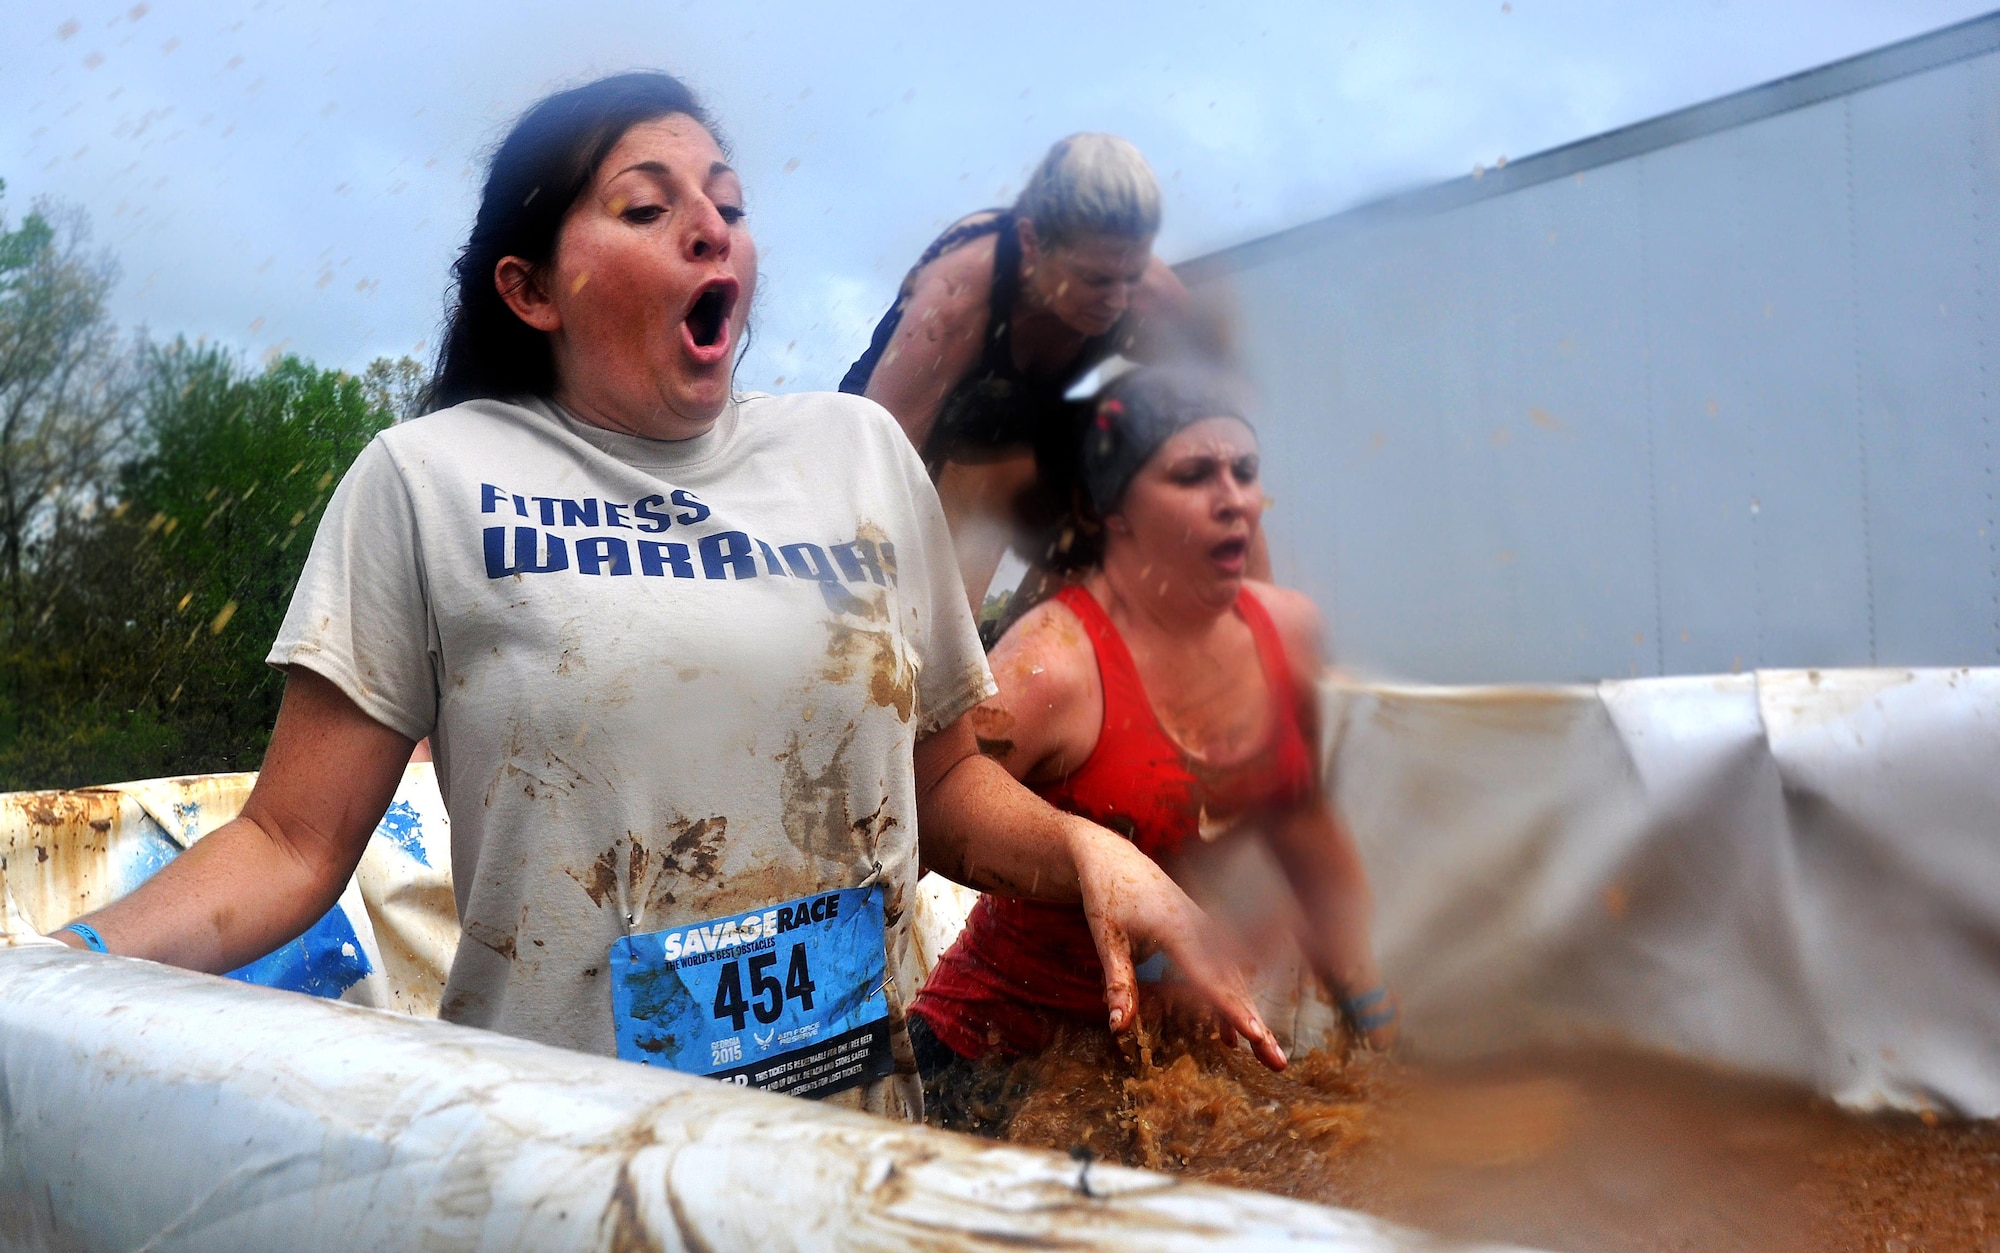 Tech. Sgt. Vicki Brown, 94th Airlift Wing Command Post, wades through a muddy pool of ice water during the Georgia Spring 2015 Savage Race in Dallas, Ga., April 18, 2015. The Savage Race is an Air Force Reserve sponsored obstacle course that challenges participants in more than 20 different trials over the course of five miles. (U.S. Air Force photo/Senior Airman Daniel Phelps)